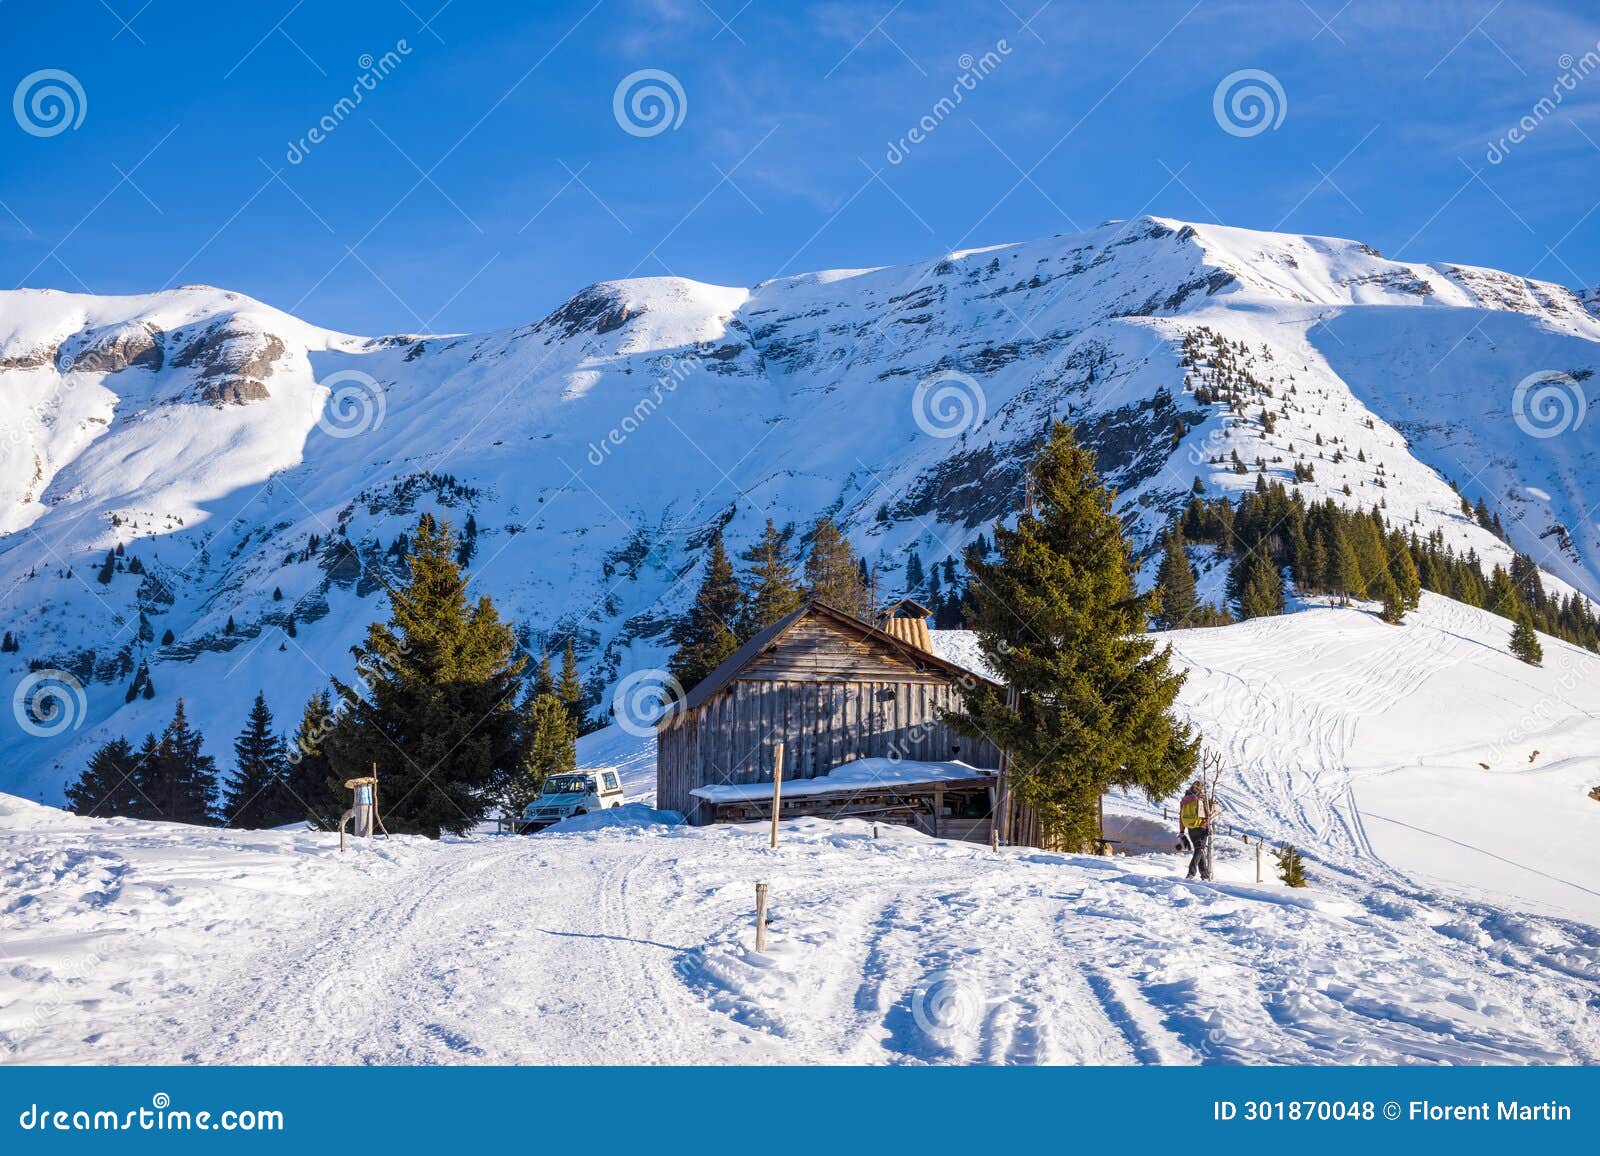 the chalets in the mont blanc massif between mont joly and aiguille croche in europe, france, rhone alpes, savoie, alps, in winter